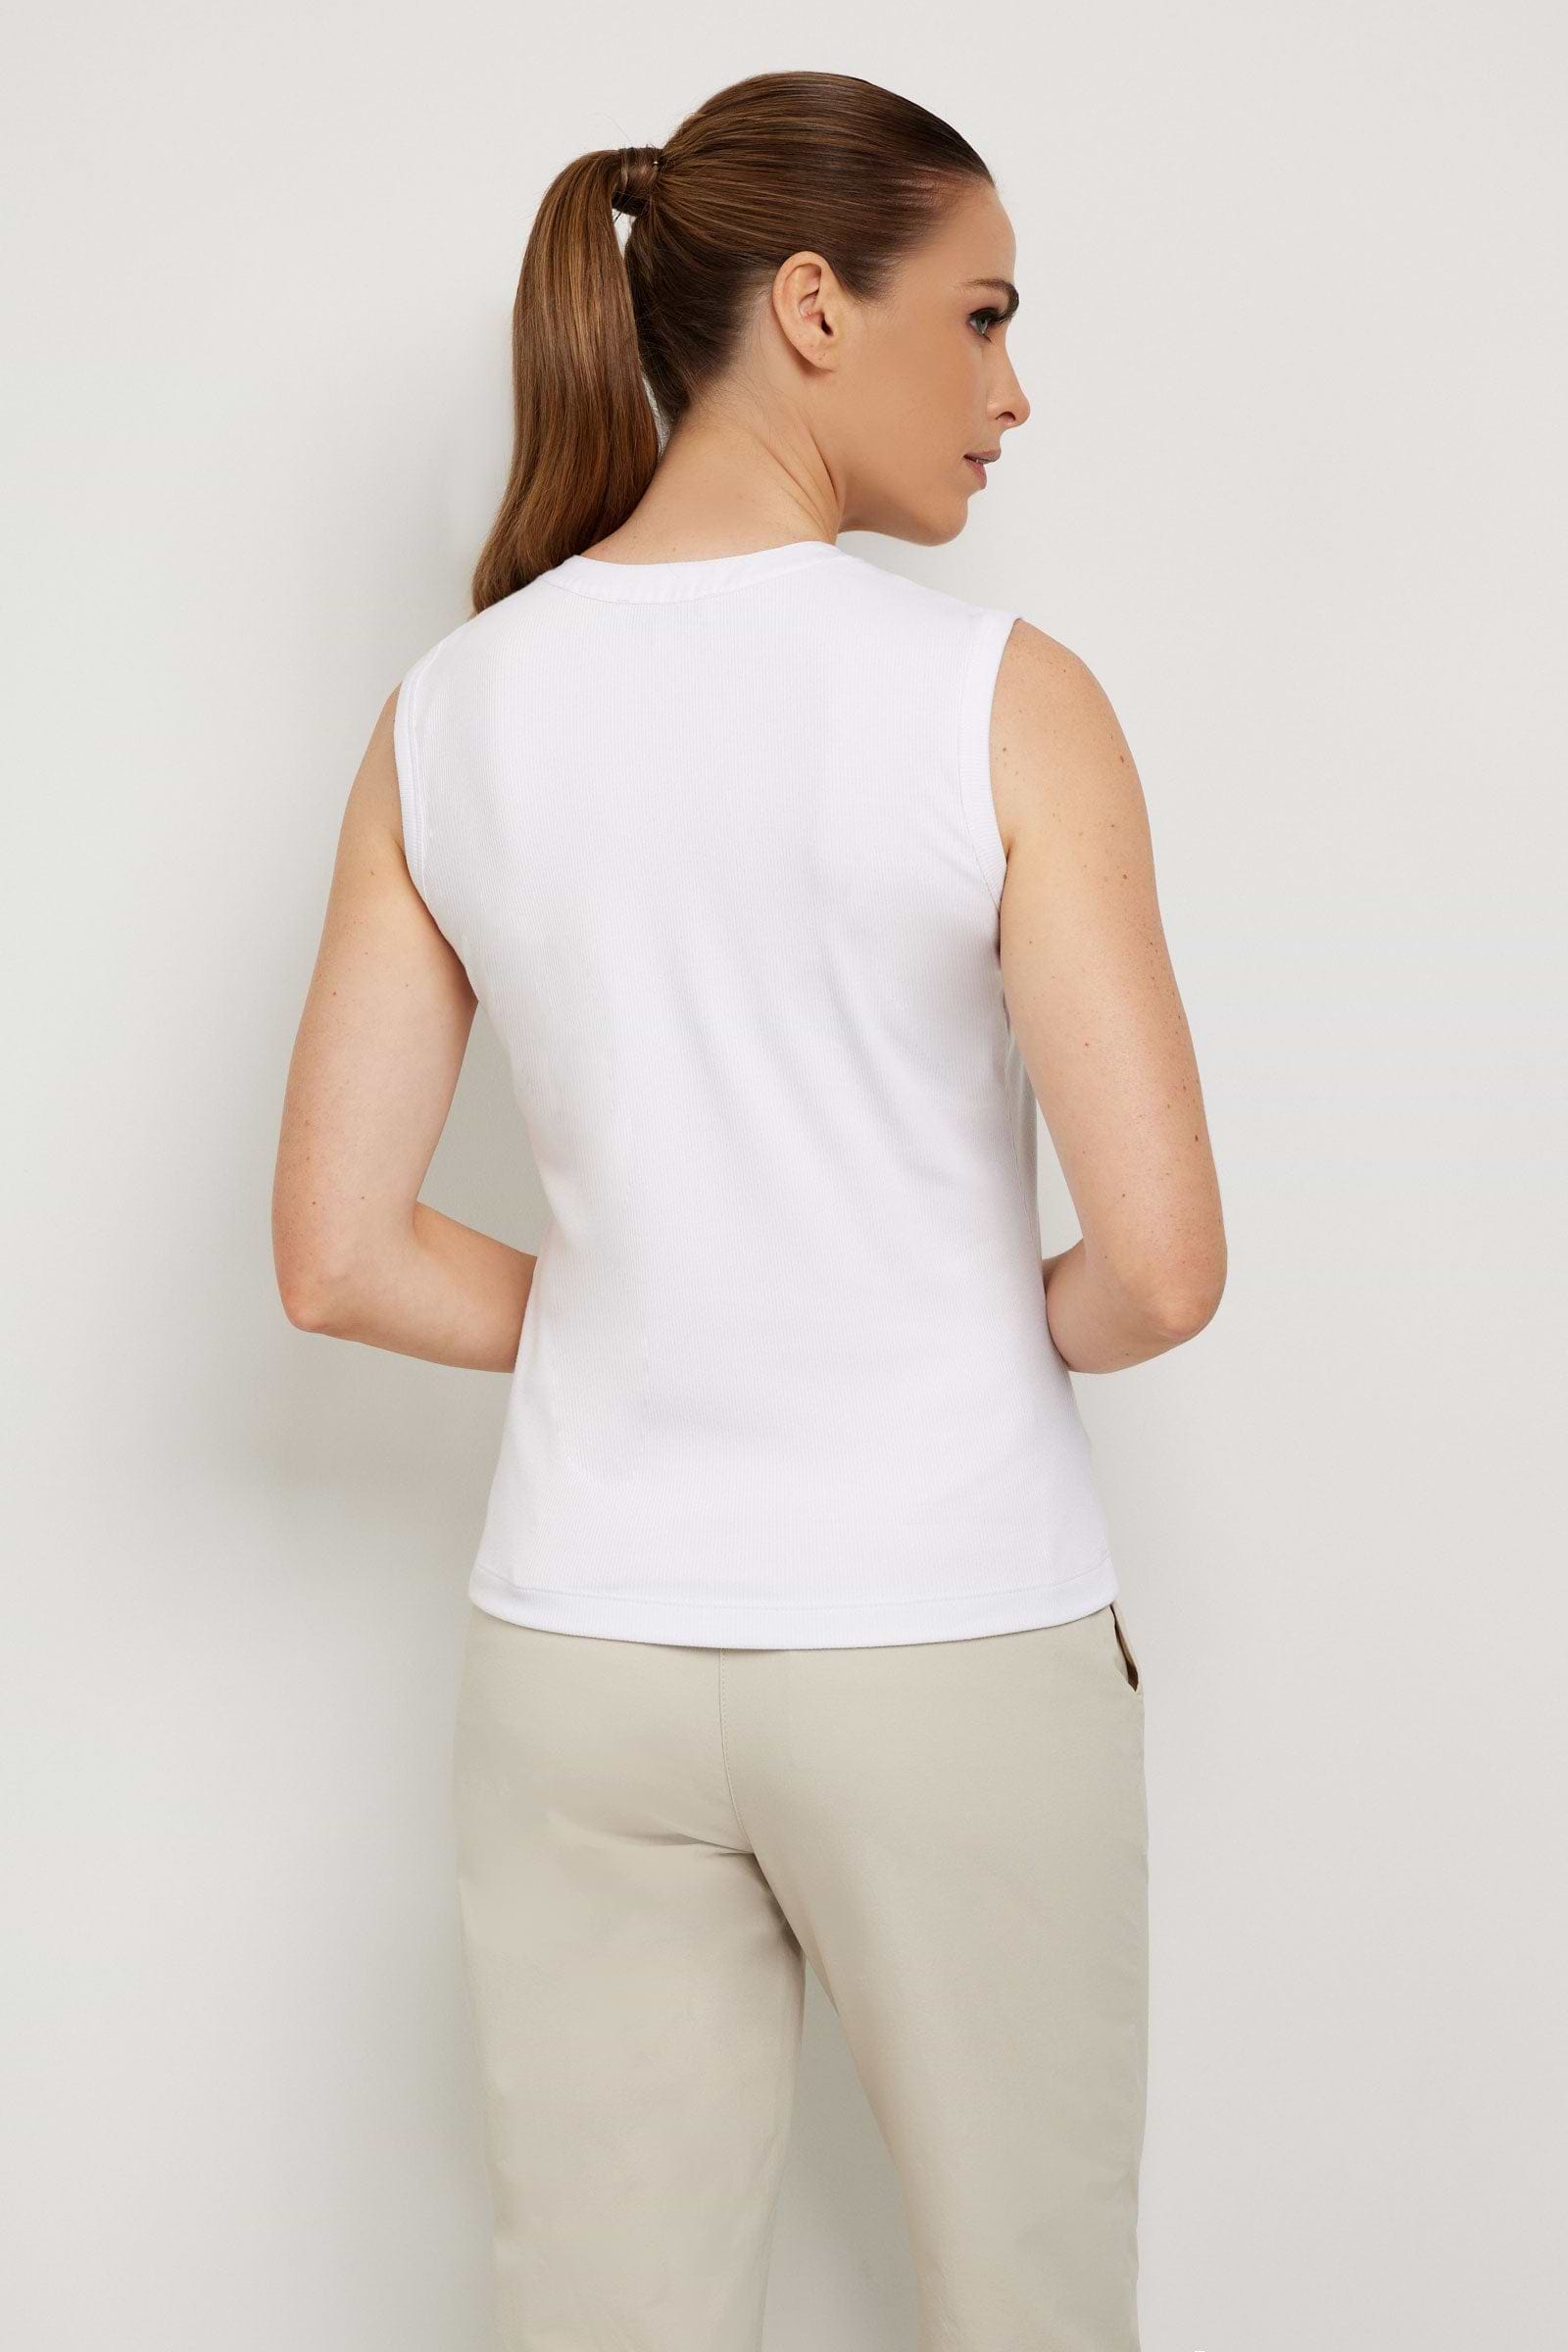 The Best Travel Top. Woman Showing the Back Profile of a Madelyn Top in White.